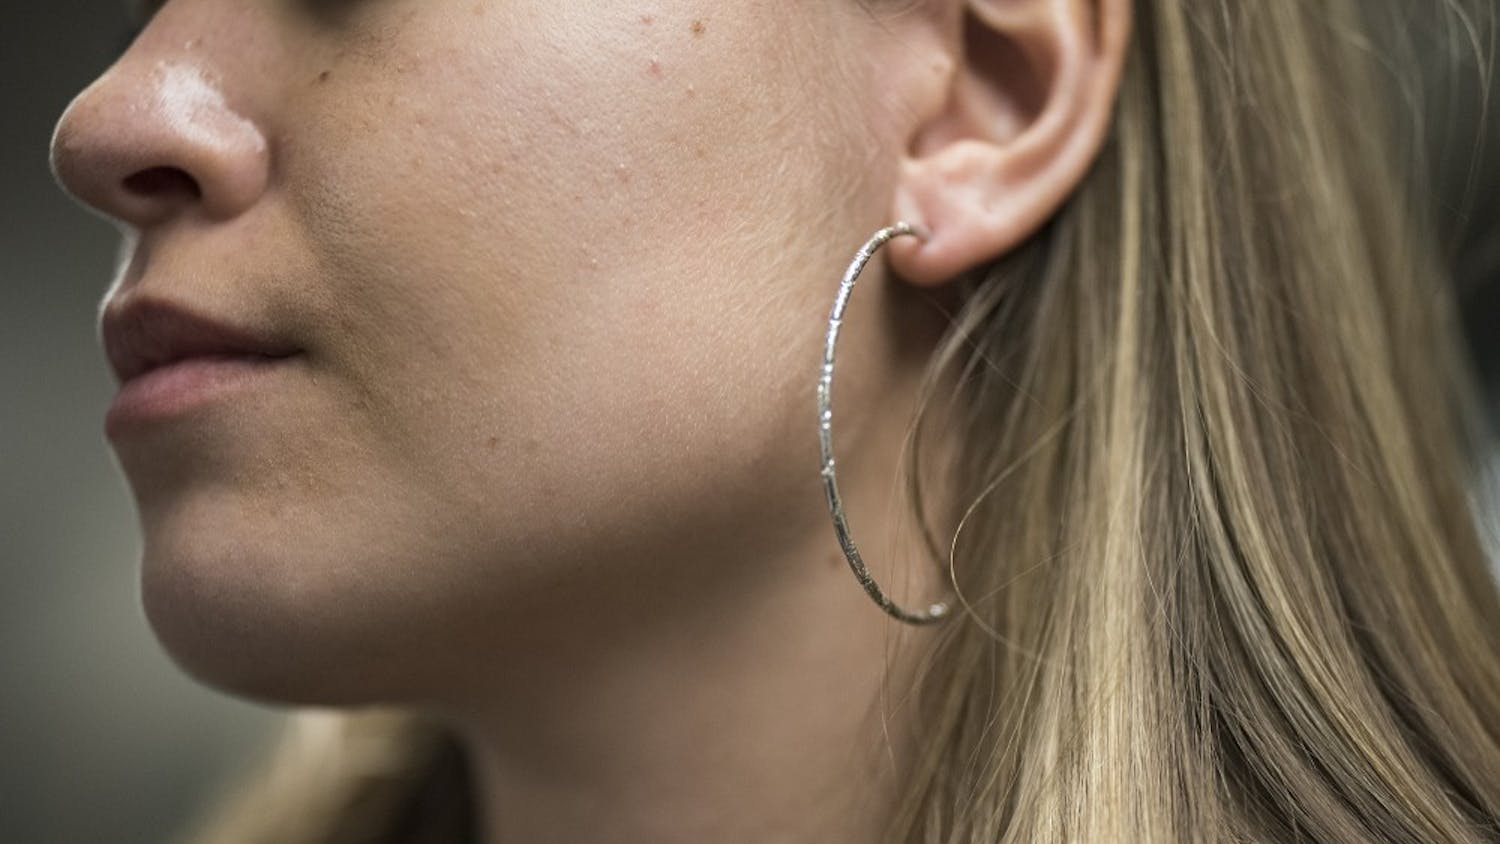 According to columnist Katie Chrisco, hoop earrings are a new Black Friday trend. Other Black Friday trends include embroidered boots and fur jackets.&nbsp;